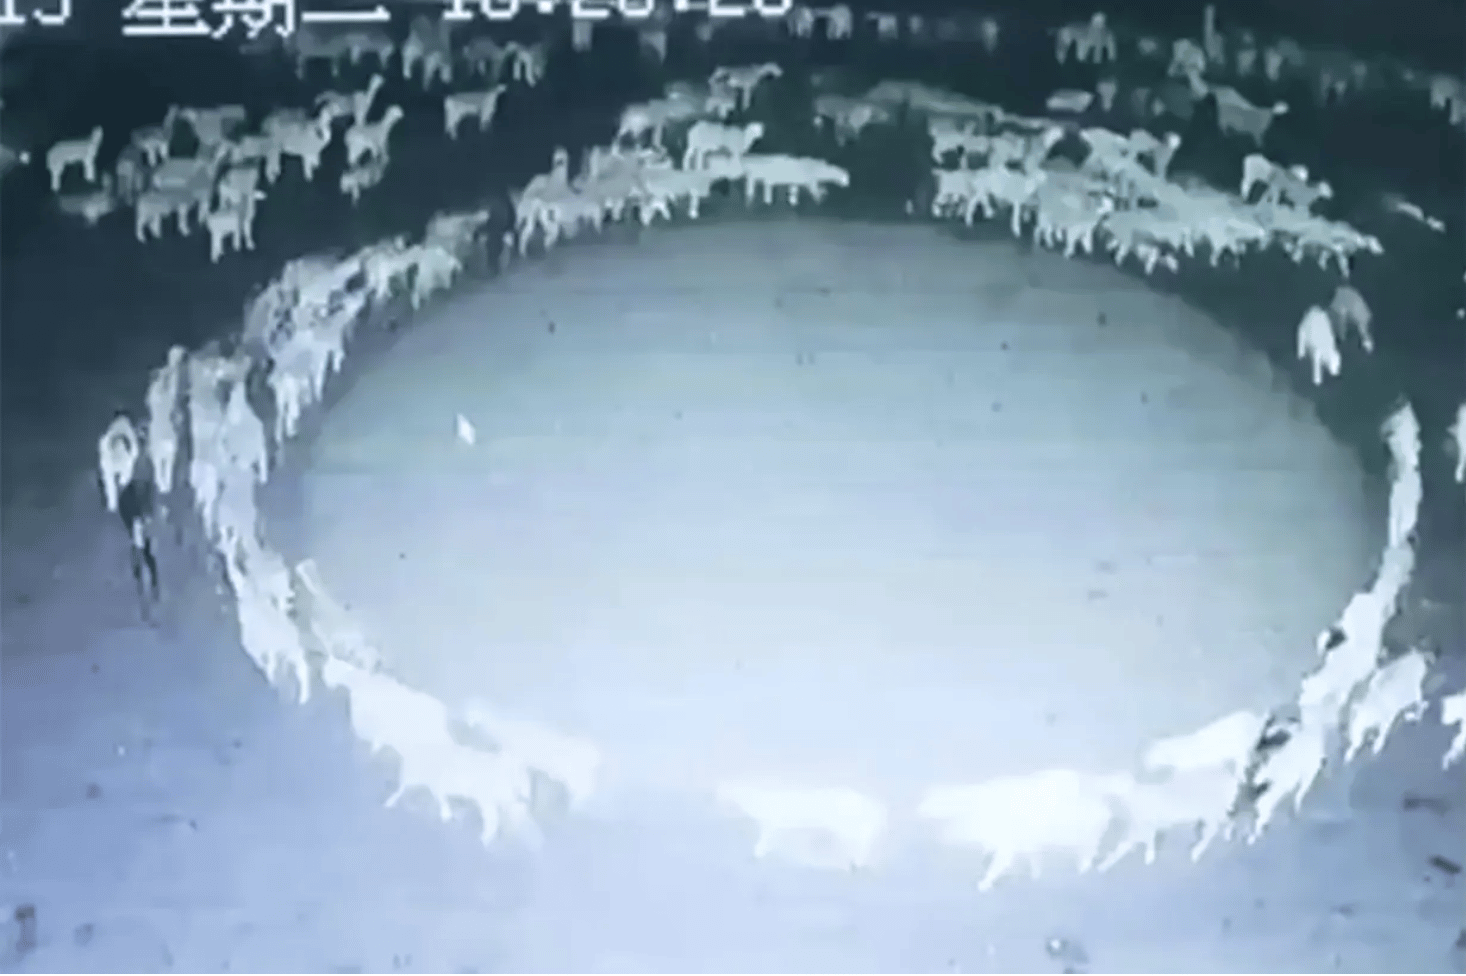 (WATCH) Massive flock of sheep has been walking in a circle for 12 days straight in China